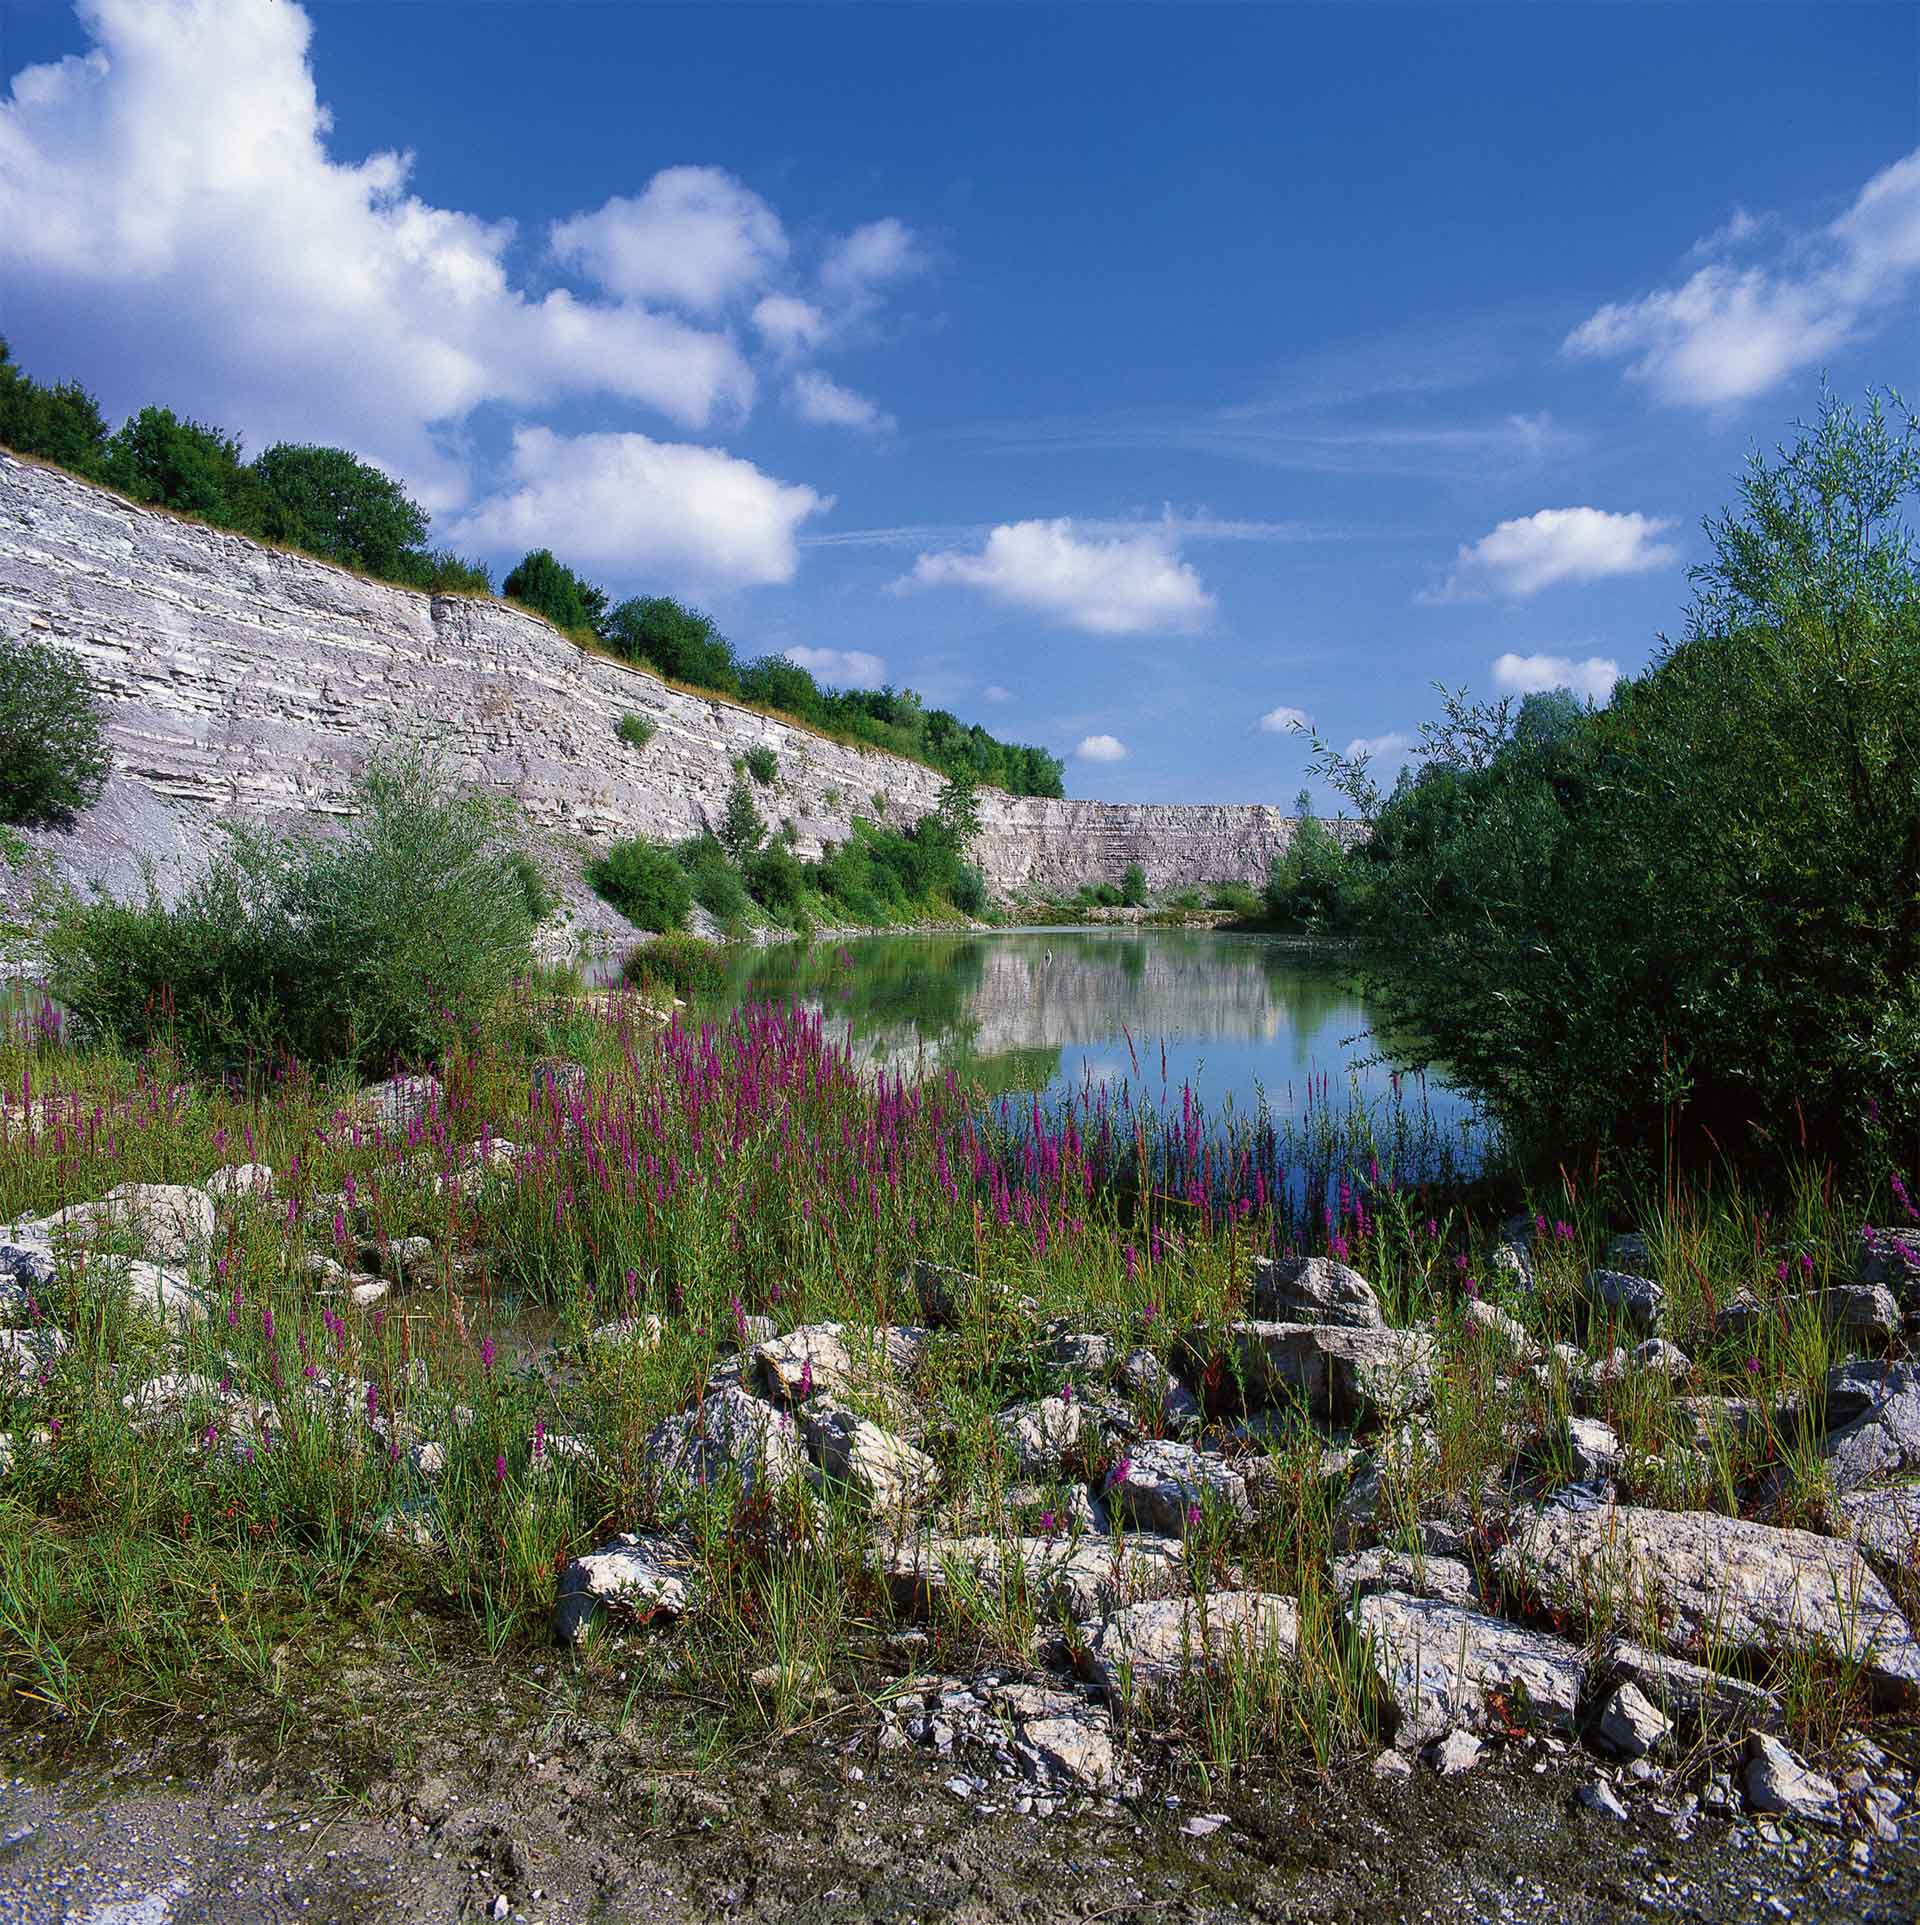 A serene quarry pond bordered by lush greenery and vibrant purple flowers under a clear blue sky